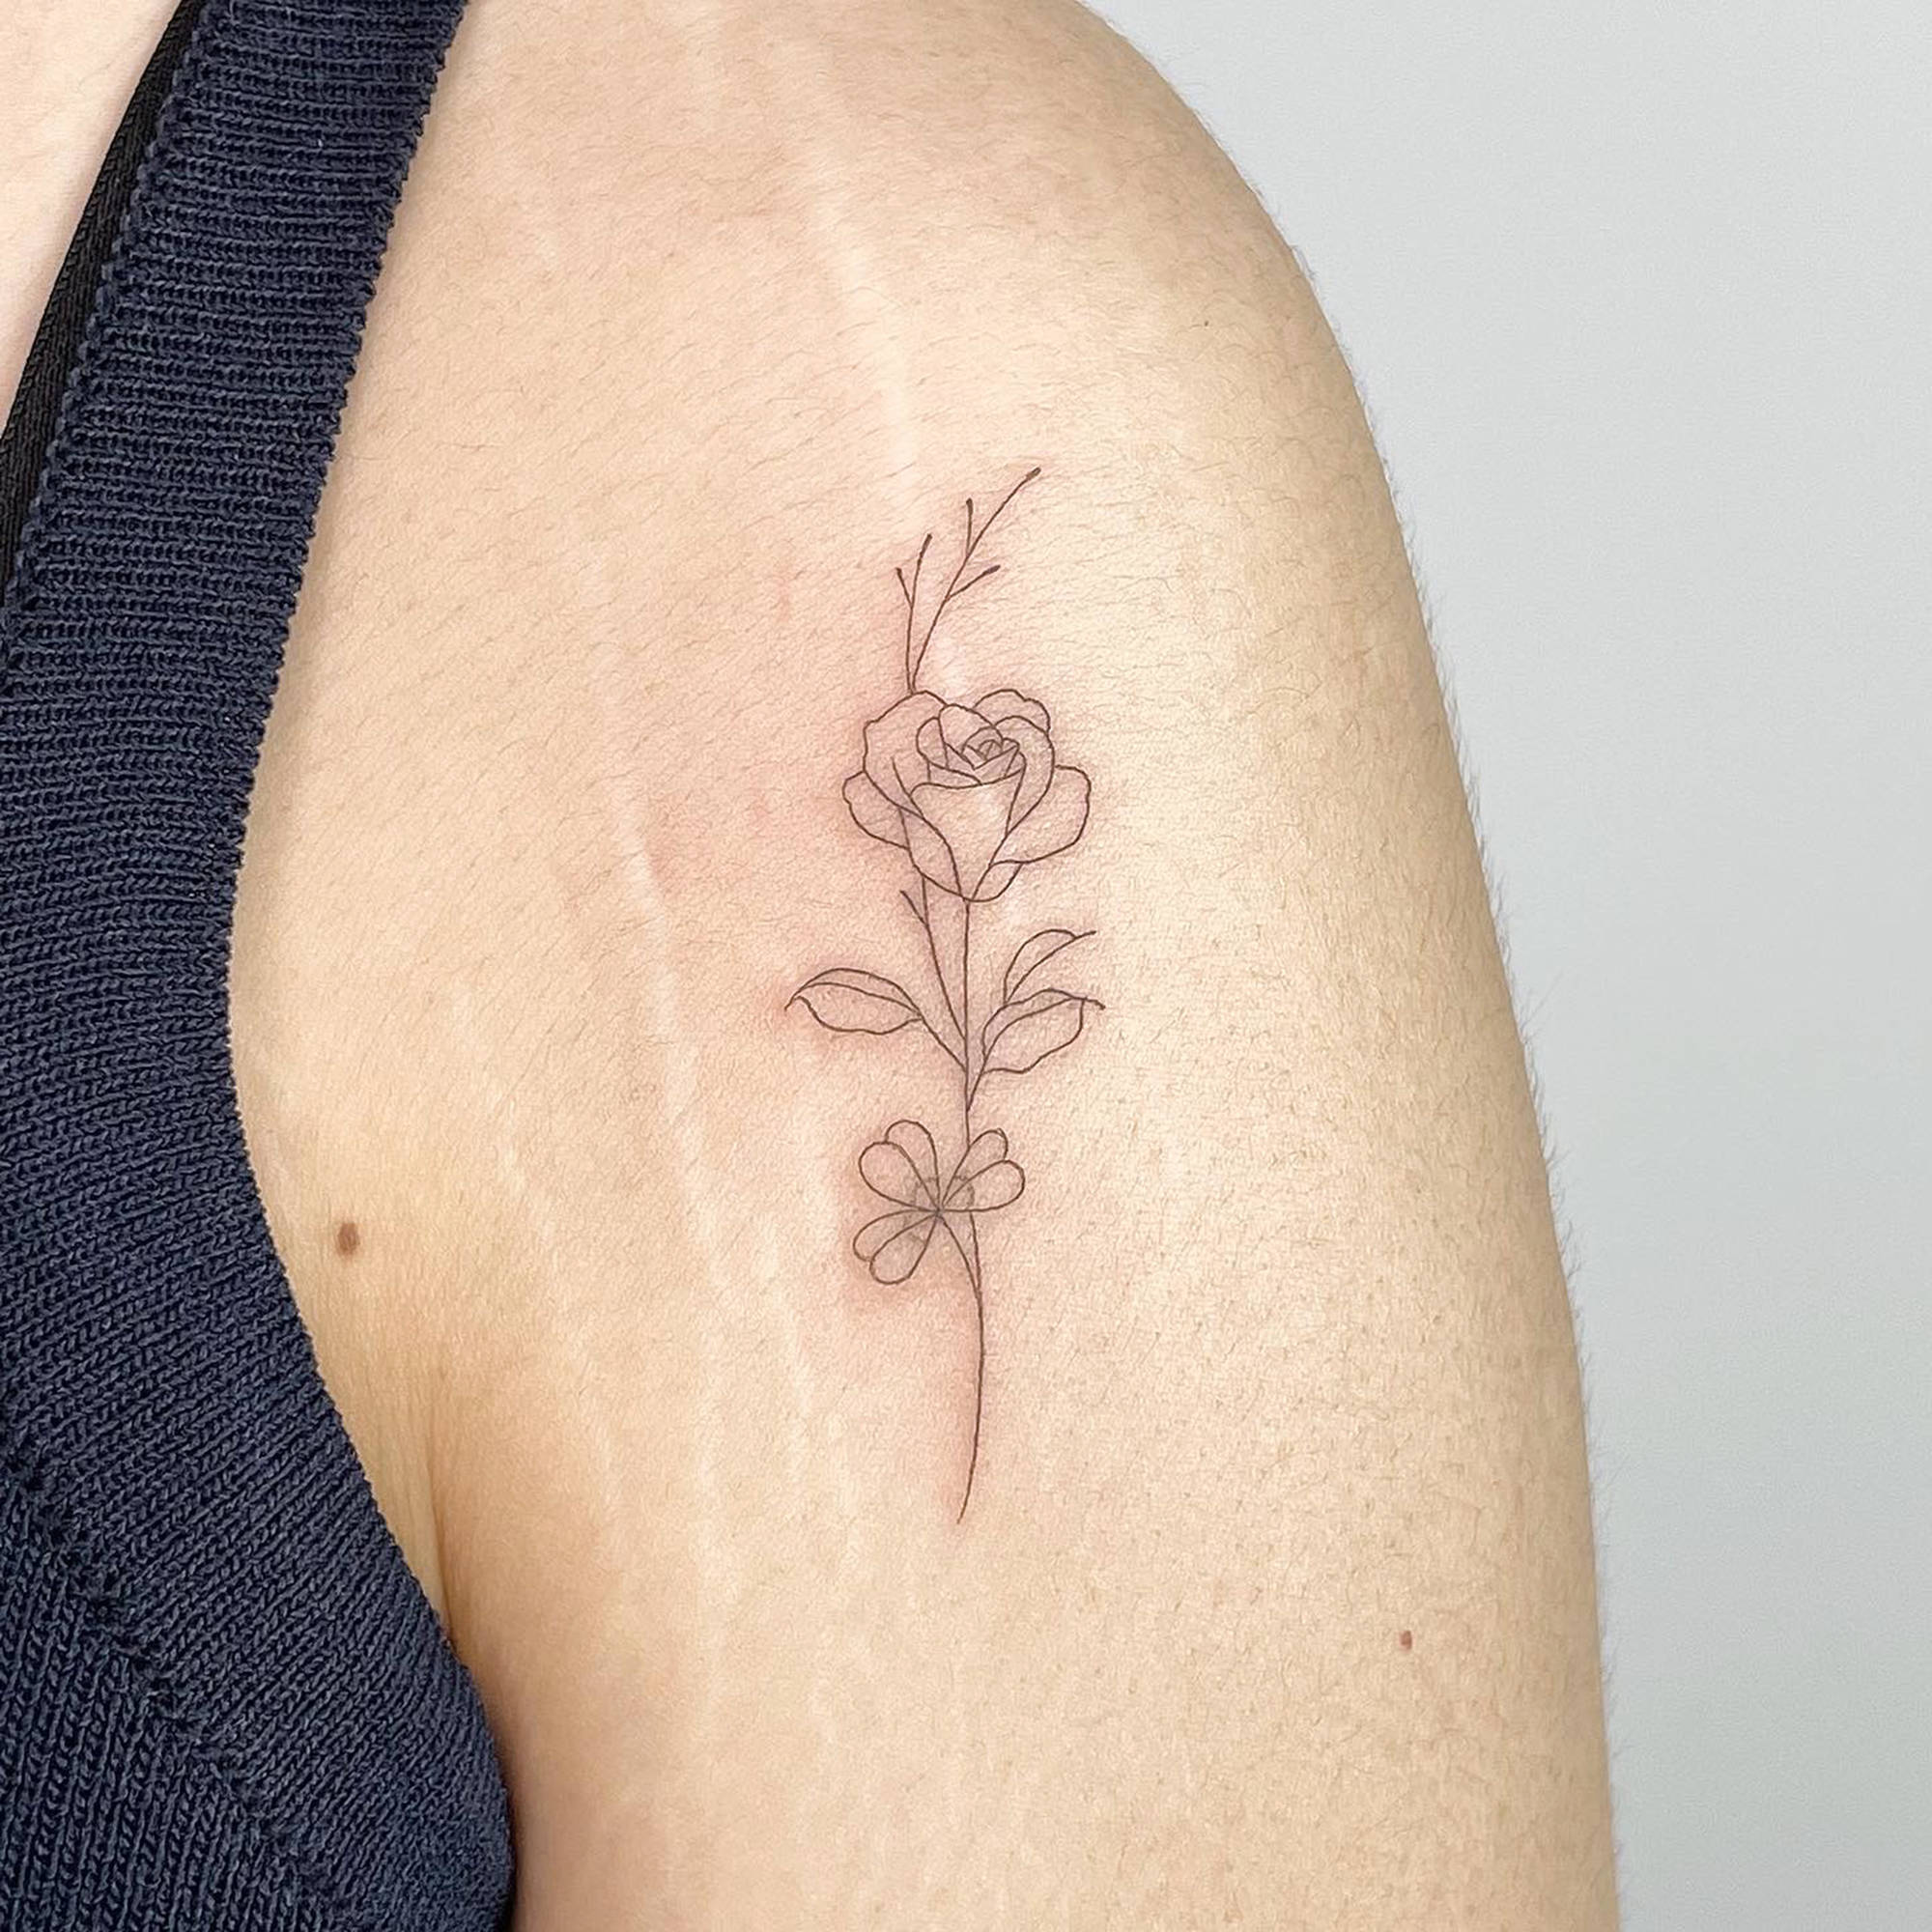 Over stretch marks, Sop s flowery linework